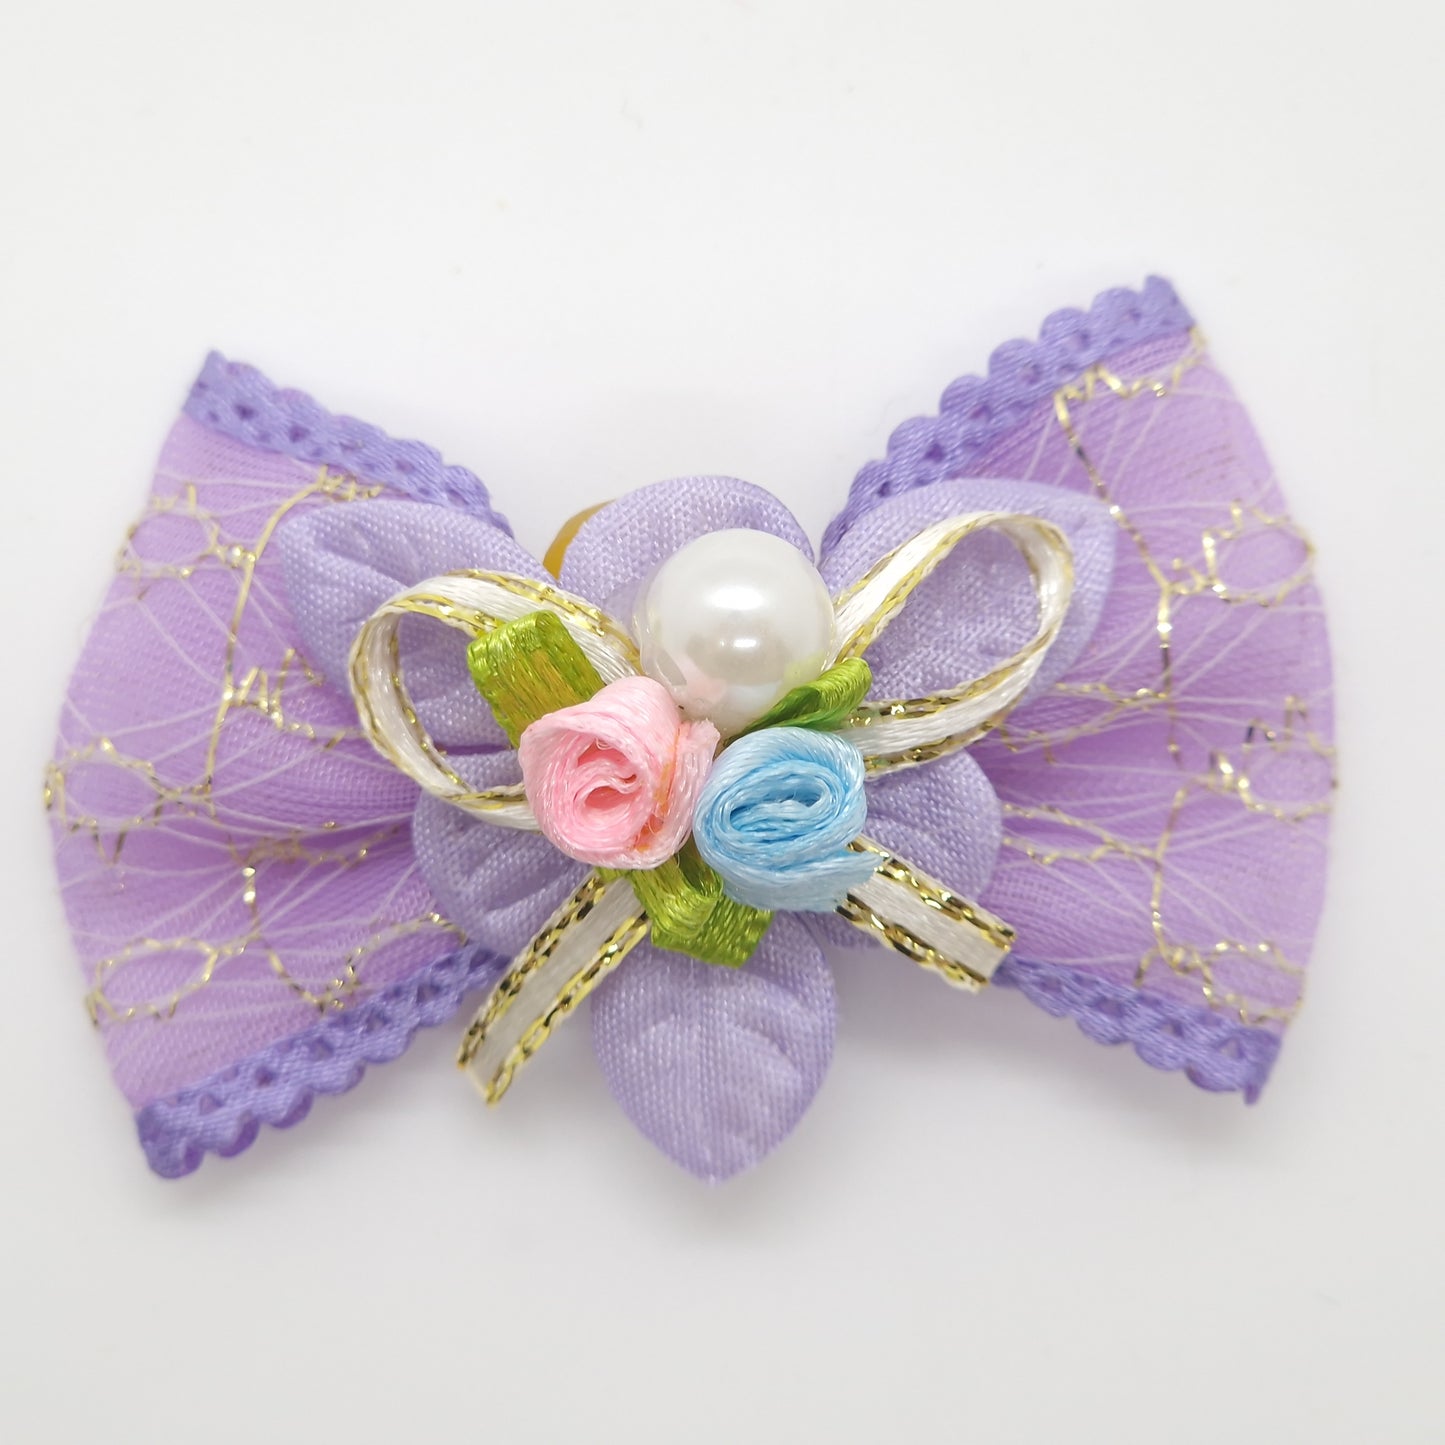 Soft Bow with Roses & Pearl on Elastic Band